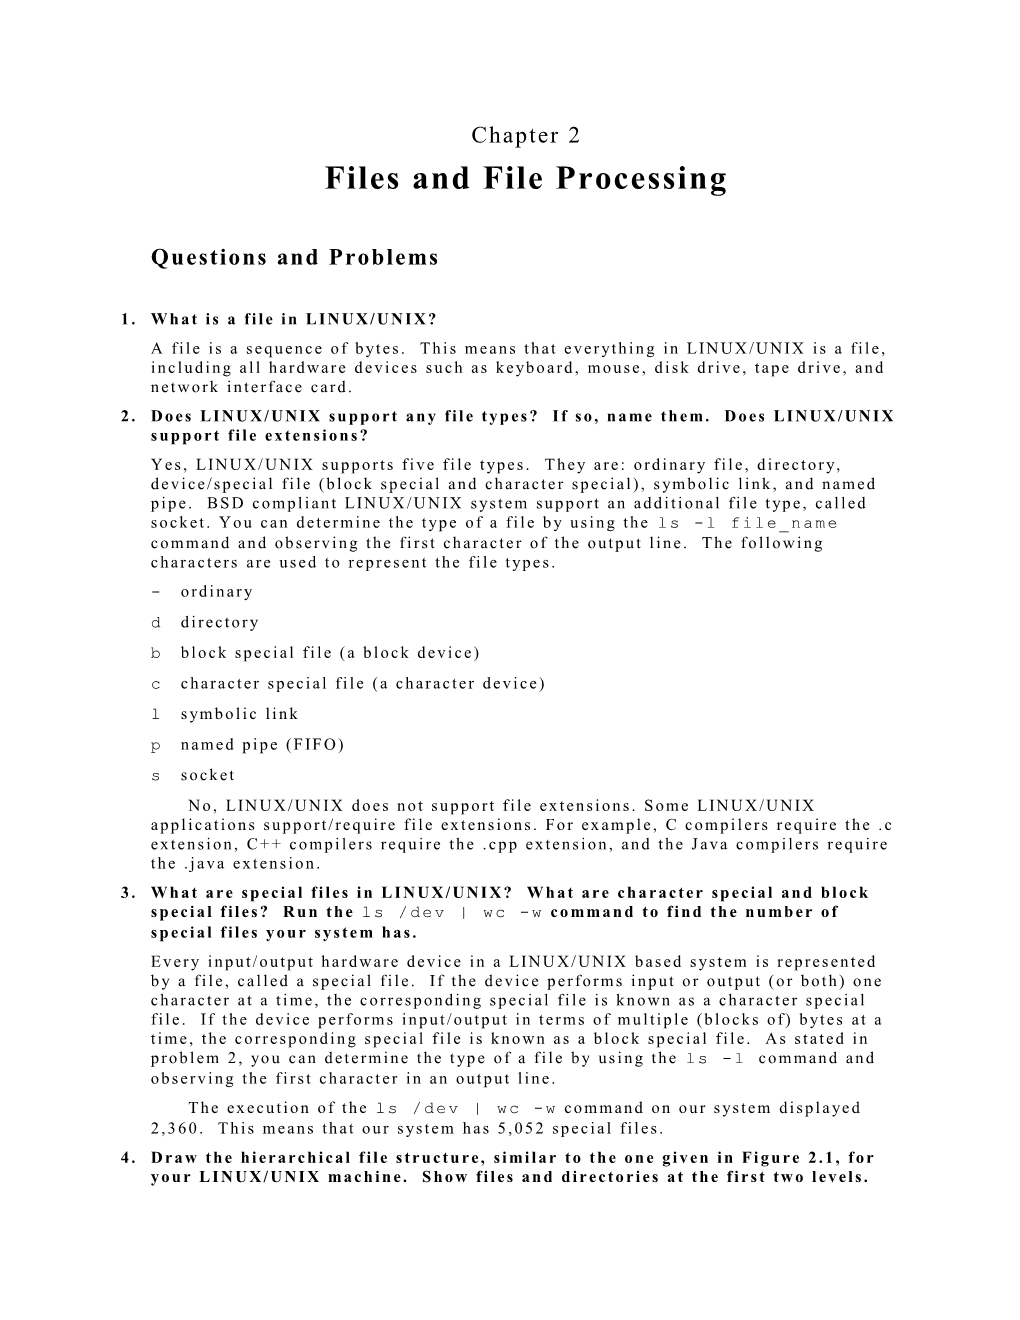 Files and File Processing